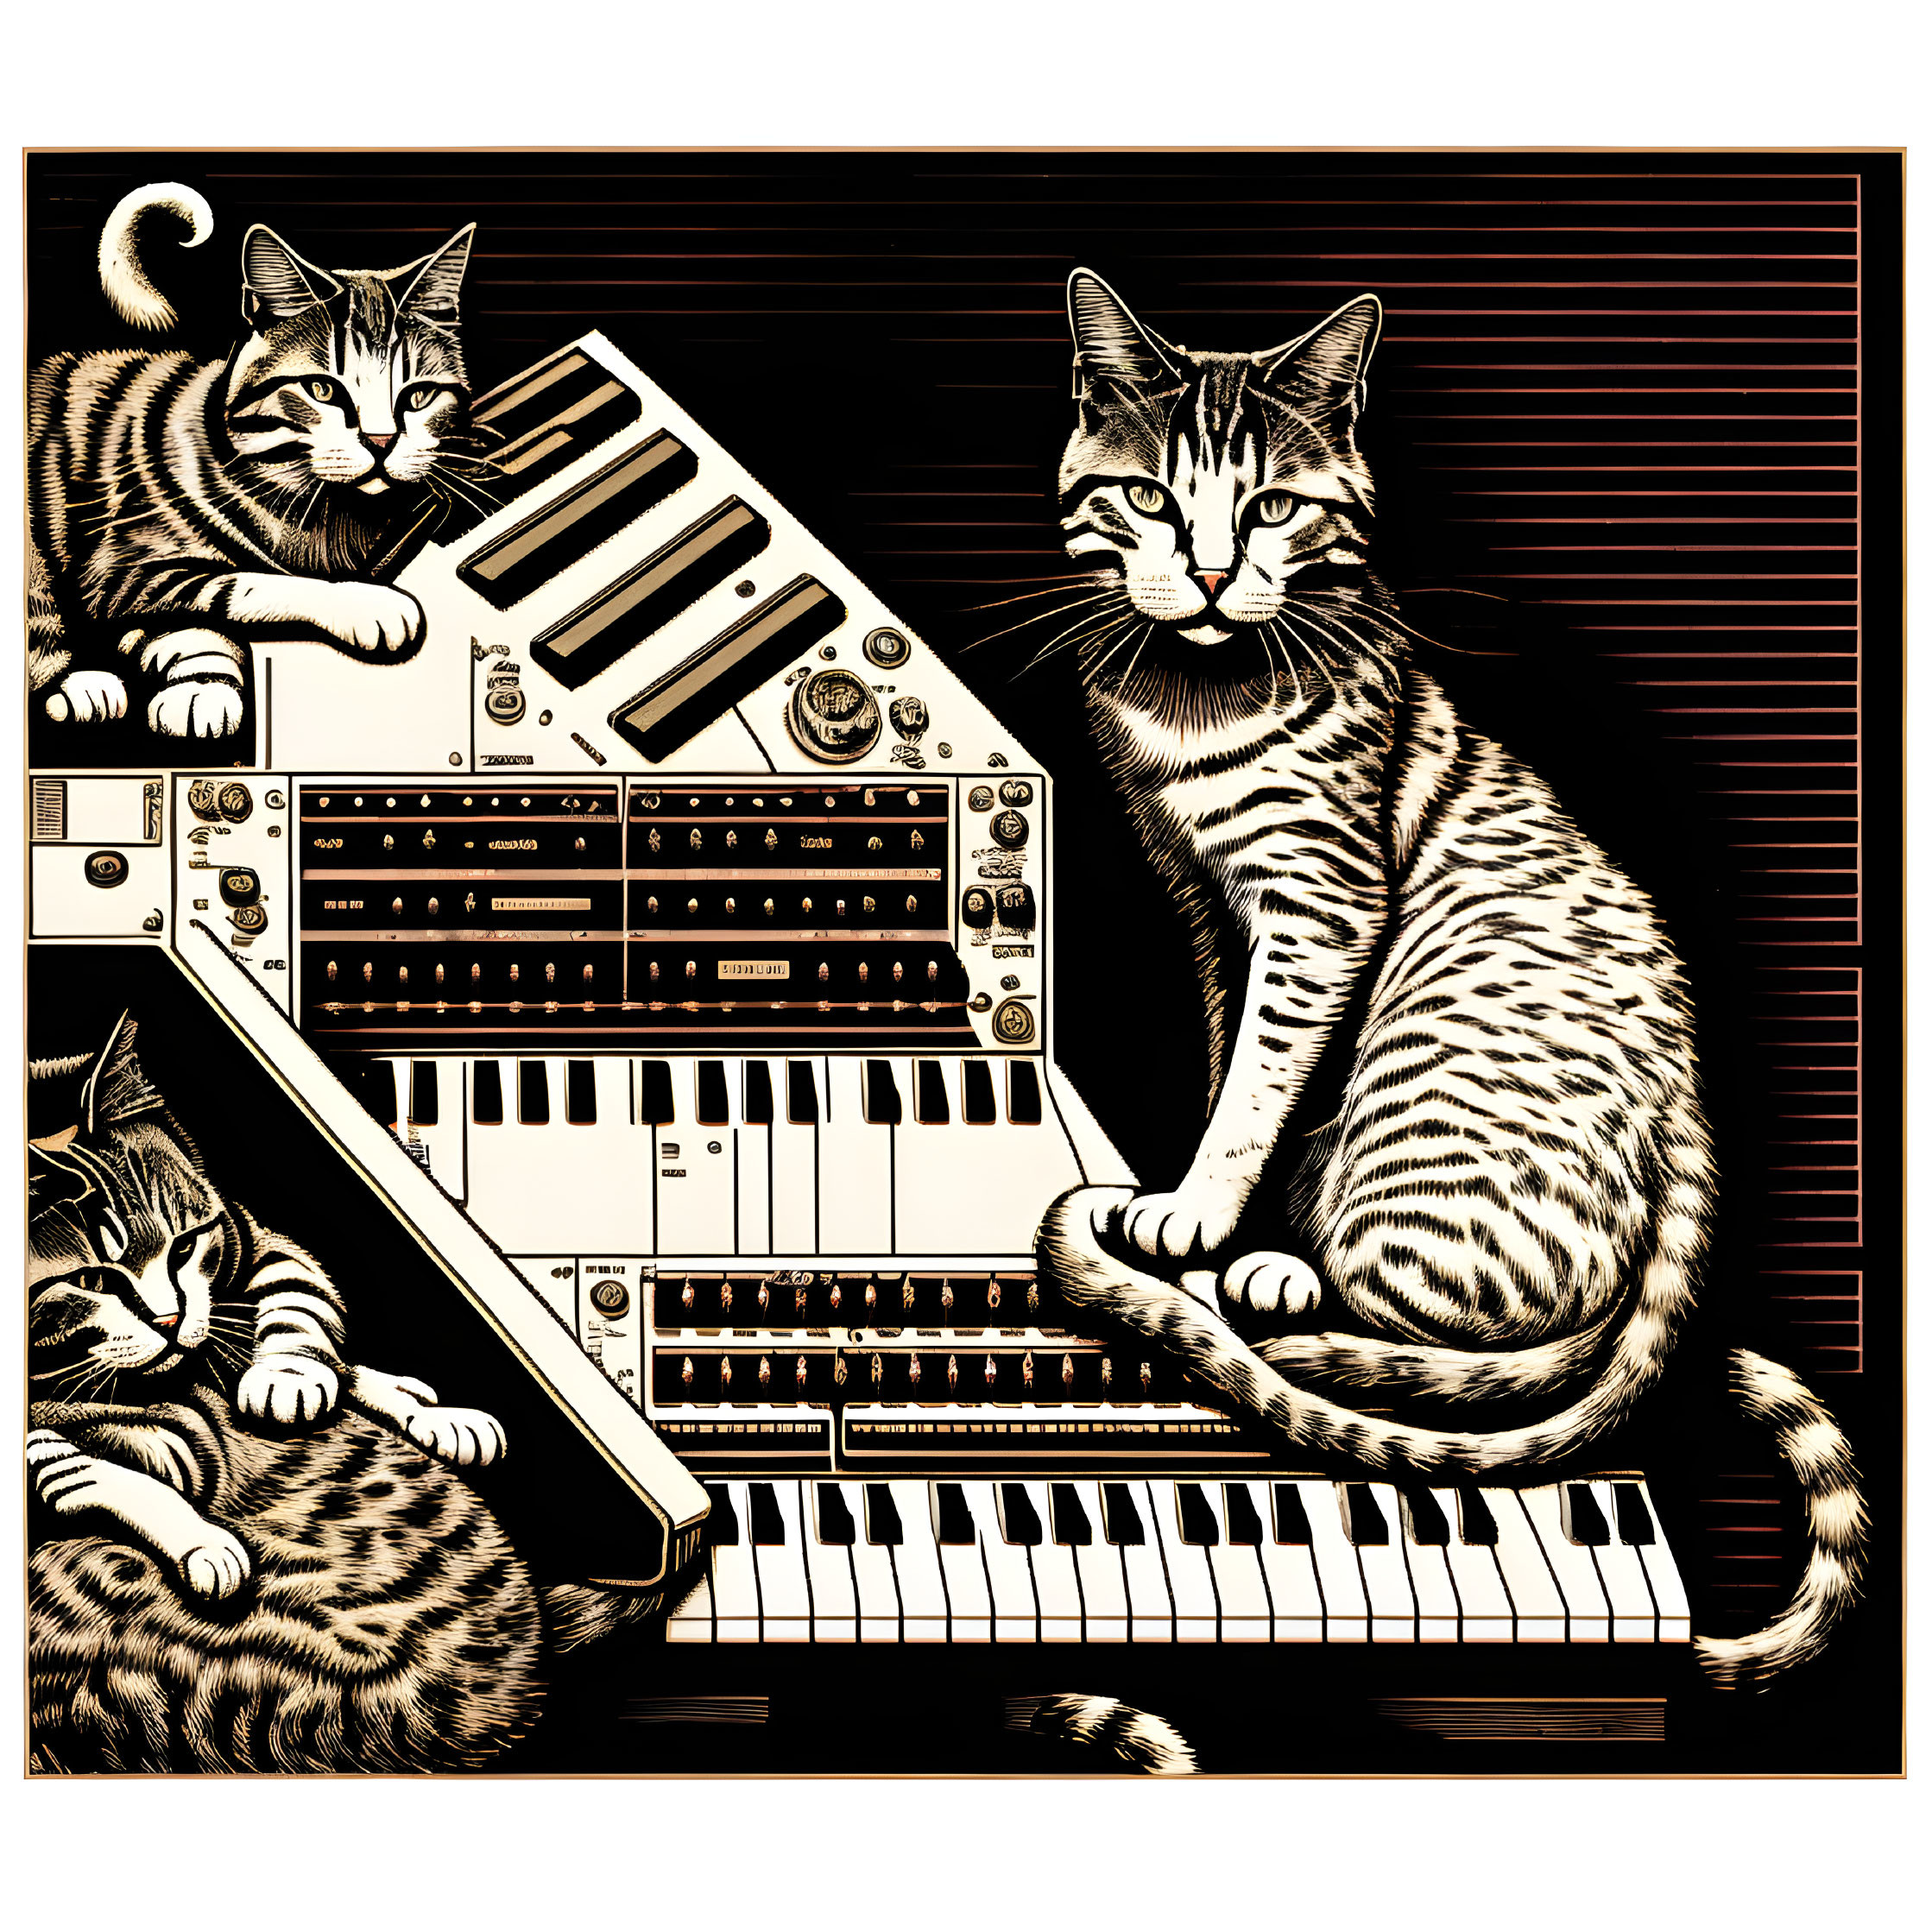 Synth Cats #1